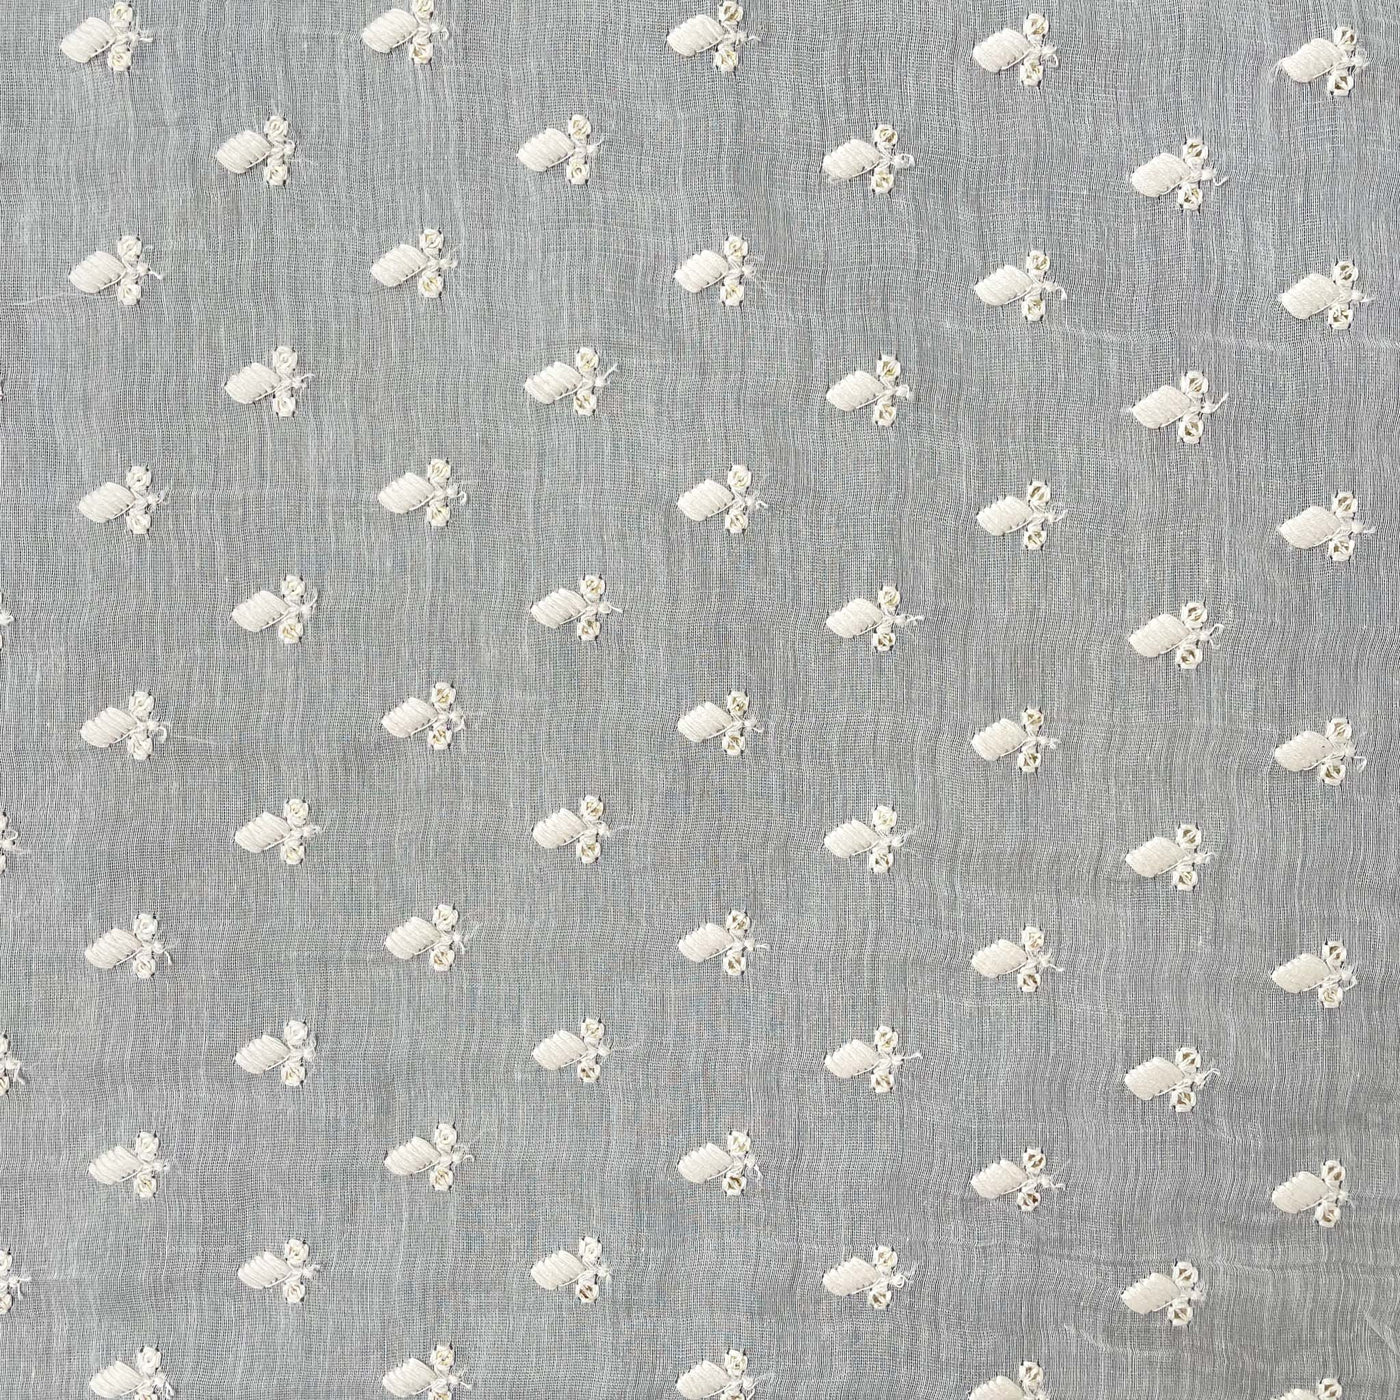 Fabric Pandit Fabric White Dyeable Abstract Flower Embroidered Pure Chanderi Fabric (Width 44 Inches)